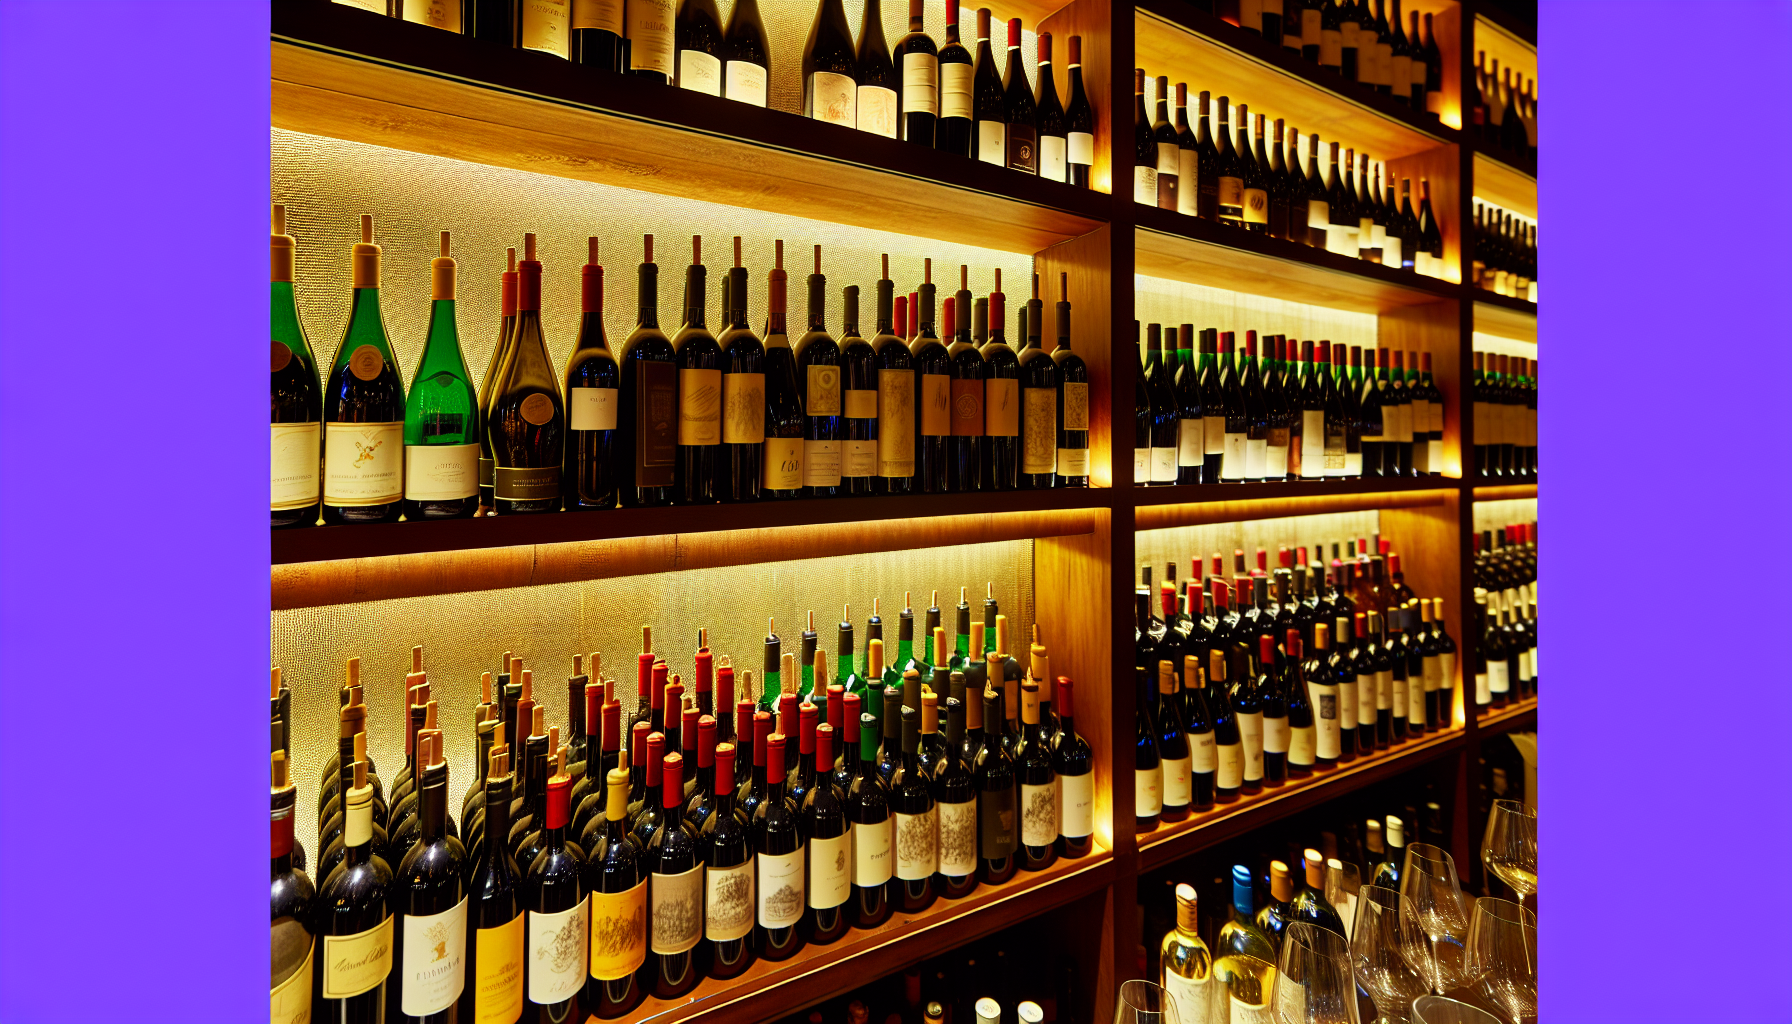 Selection of fine wines at the full bar